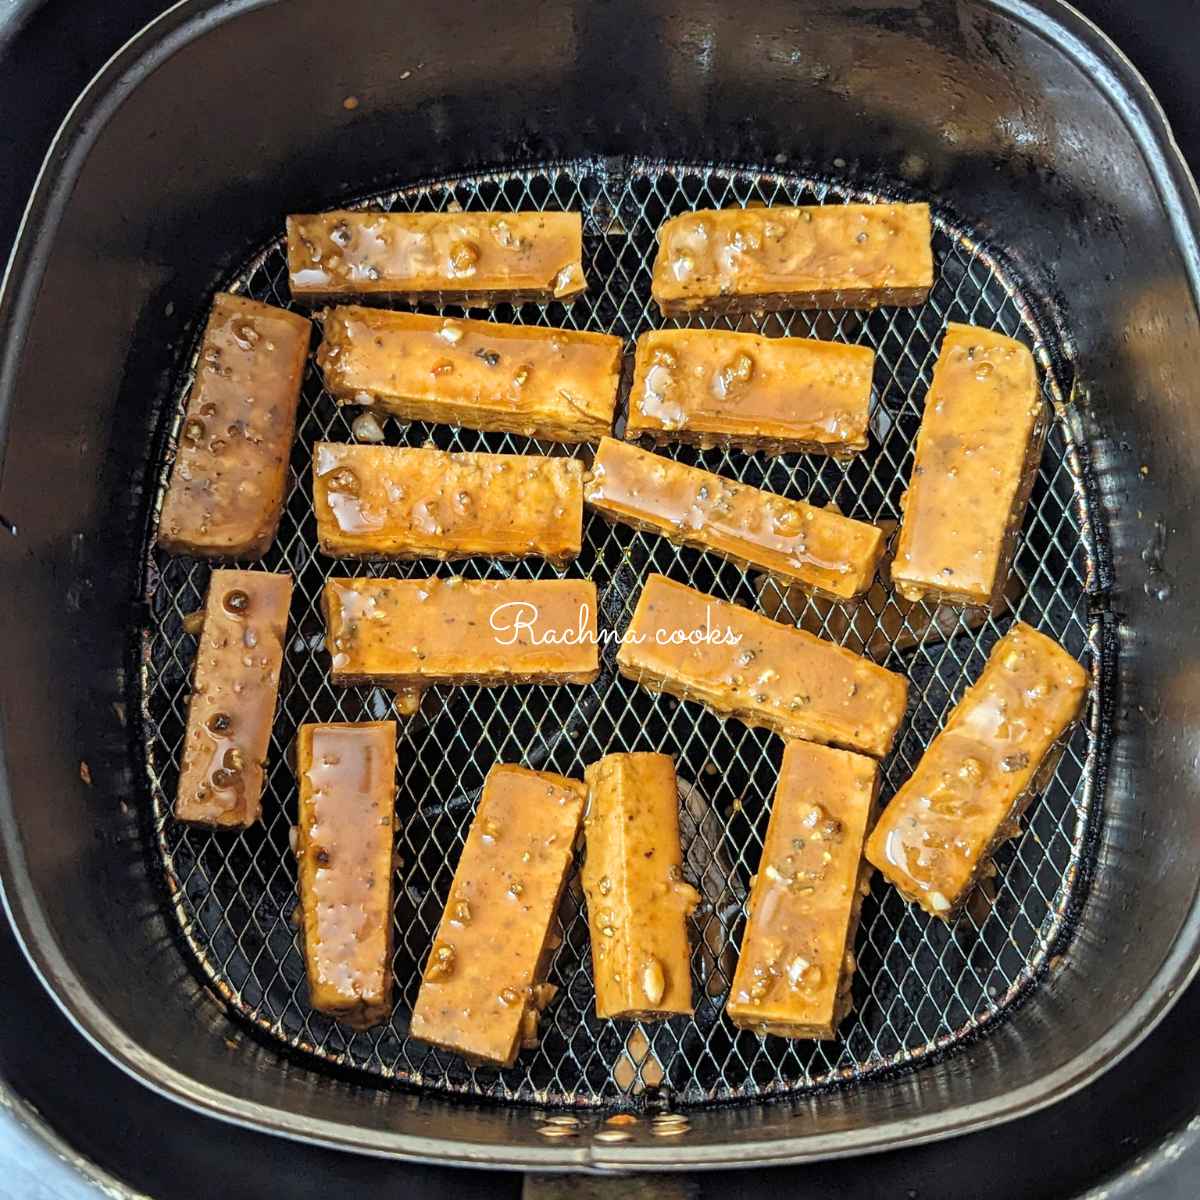 Marinated tofu fries in air fryer basket for air frying